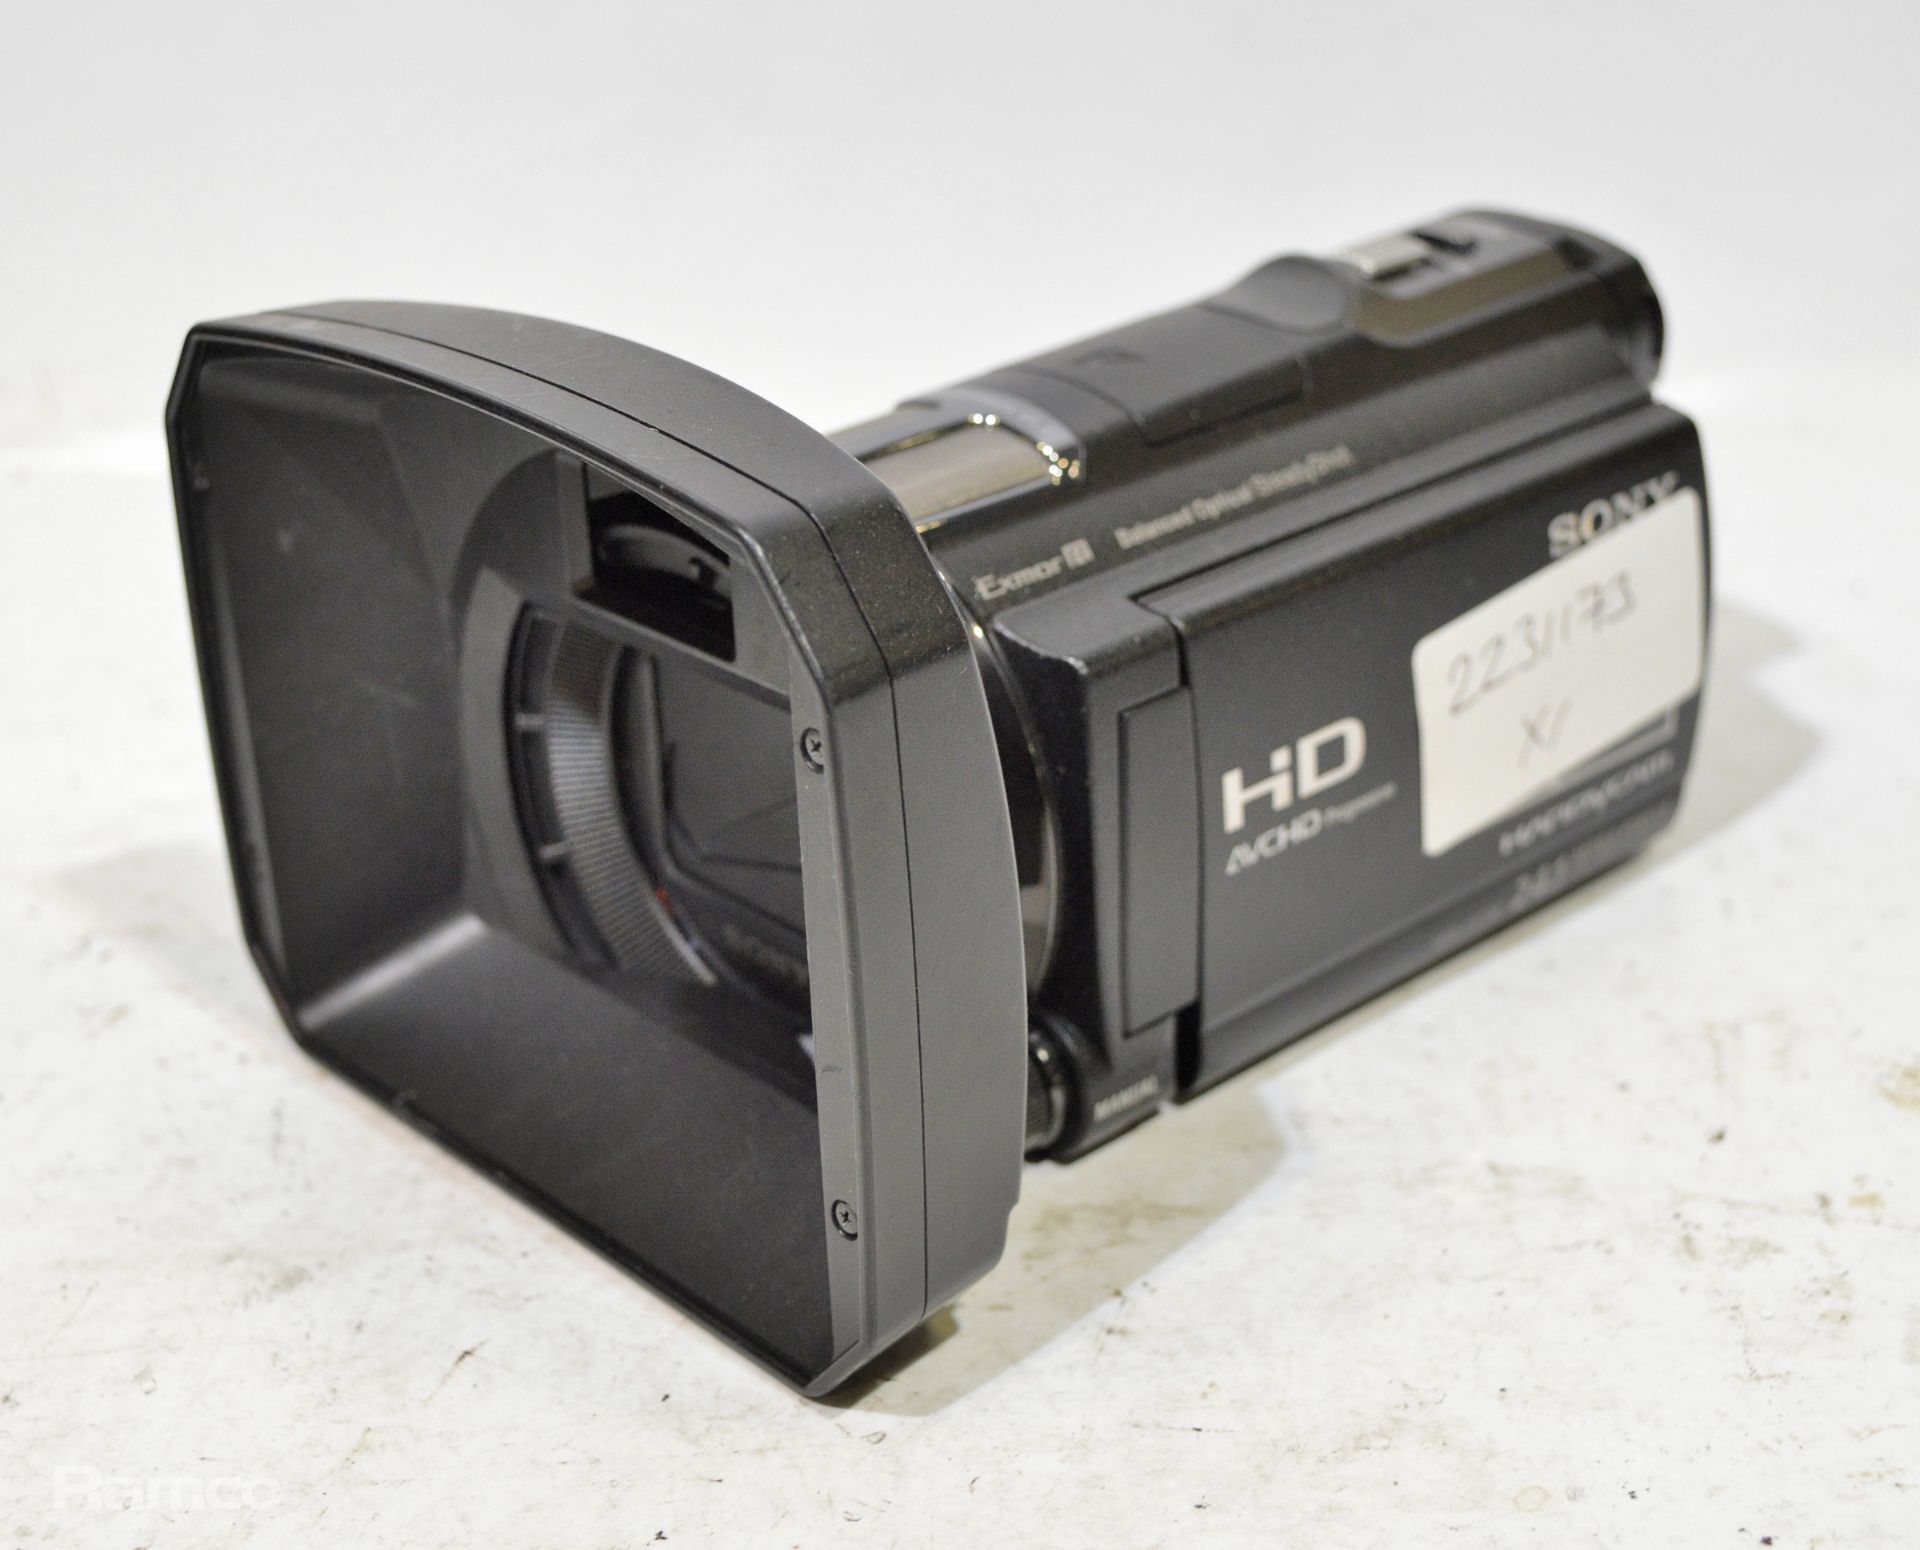 3x Sony HDR-CX730 Handycams 24.1megapixel - Image 3 of 8